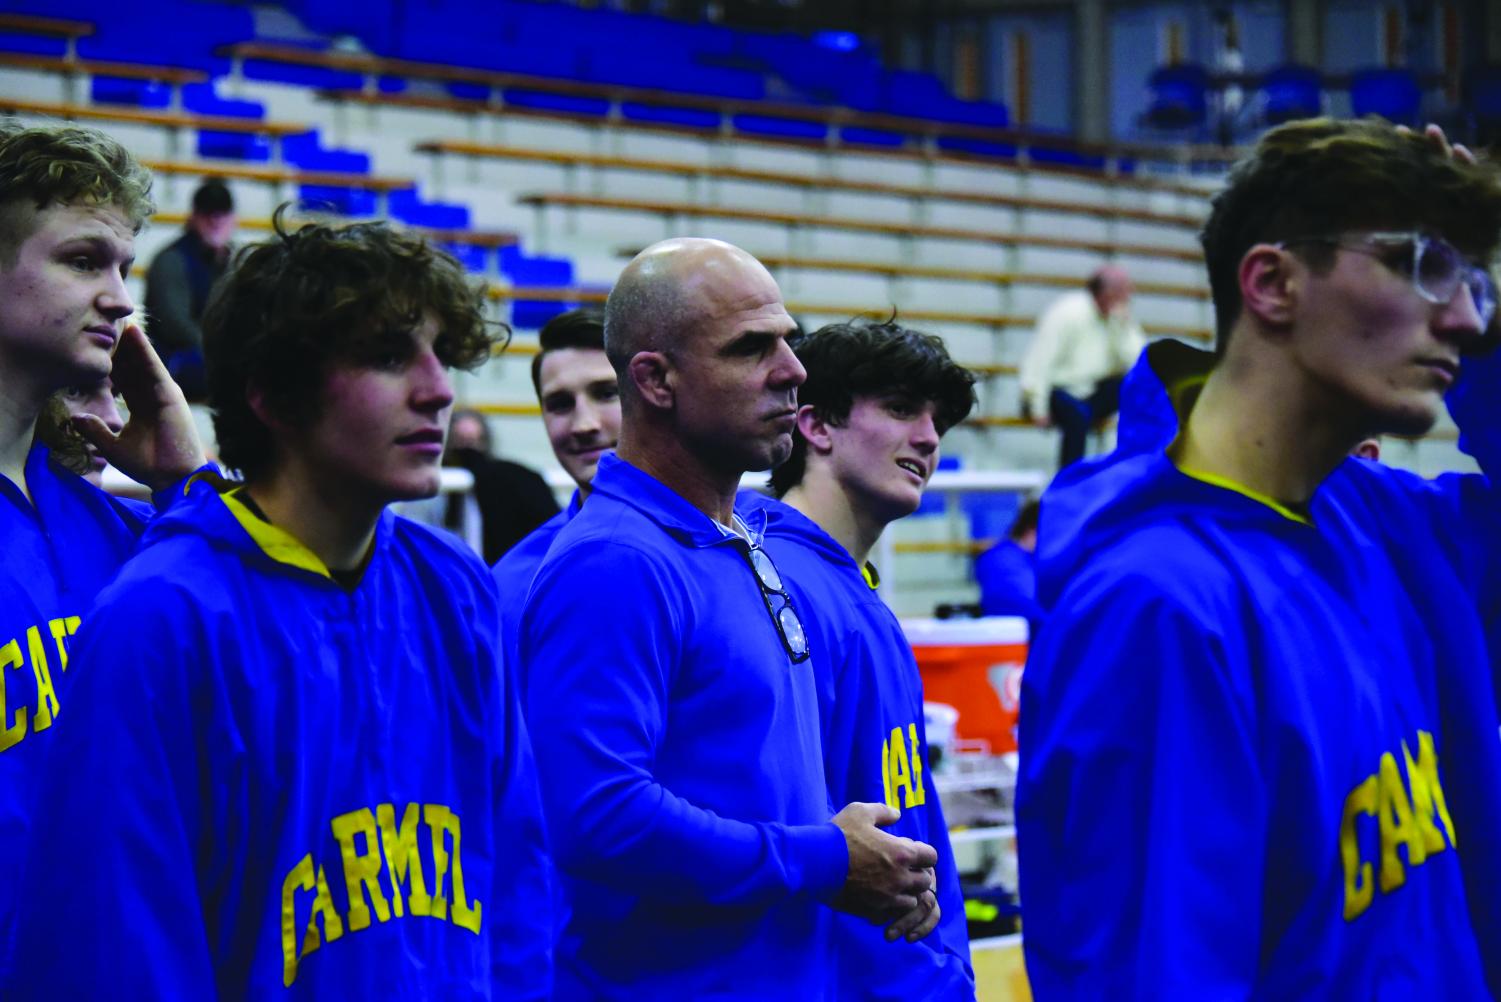 Wrestling coach Ed Pendoski (center) stands amidst wrestlers as he watches a wrestling match. Pendoski said that along with building connections with athletes, an important part of his job as a coach is to provide athletes with experiences that help them grow.